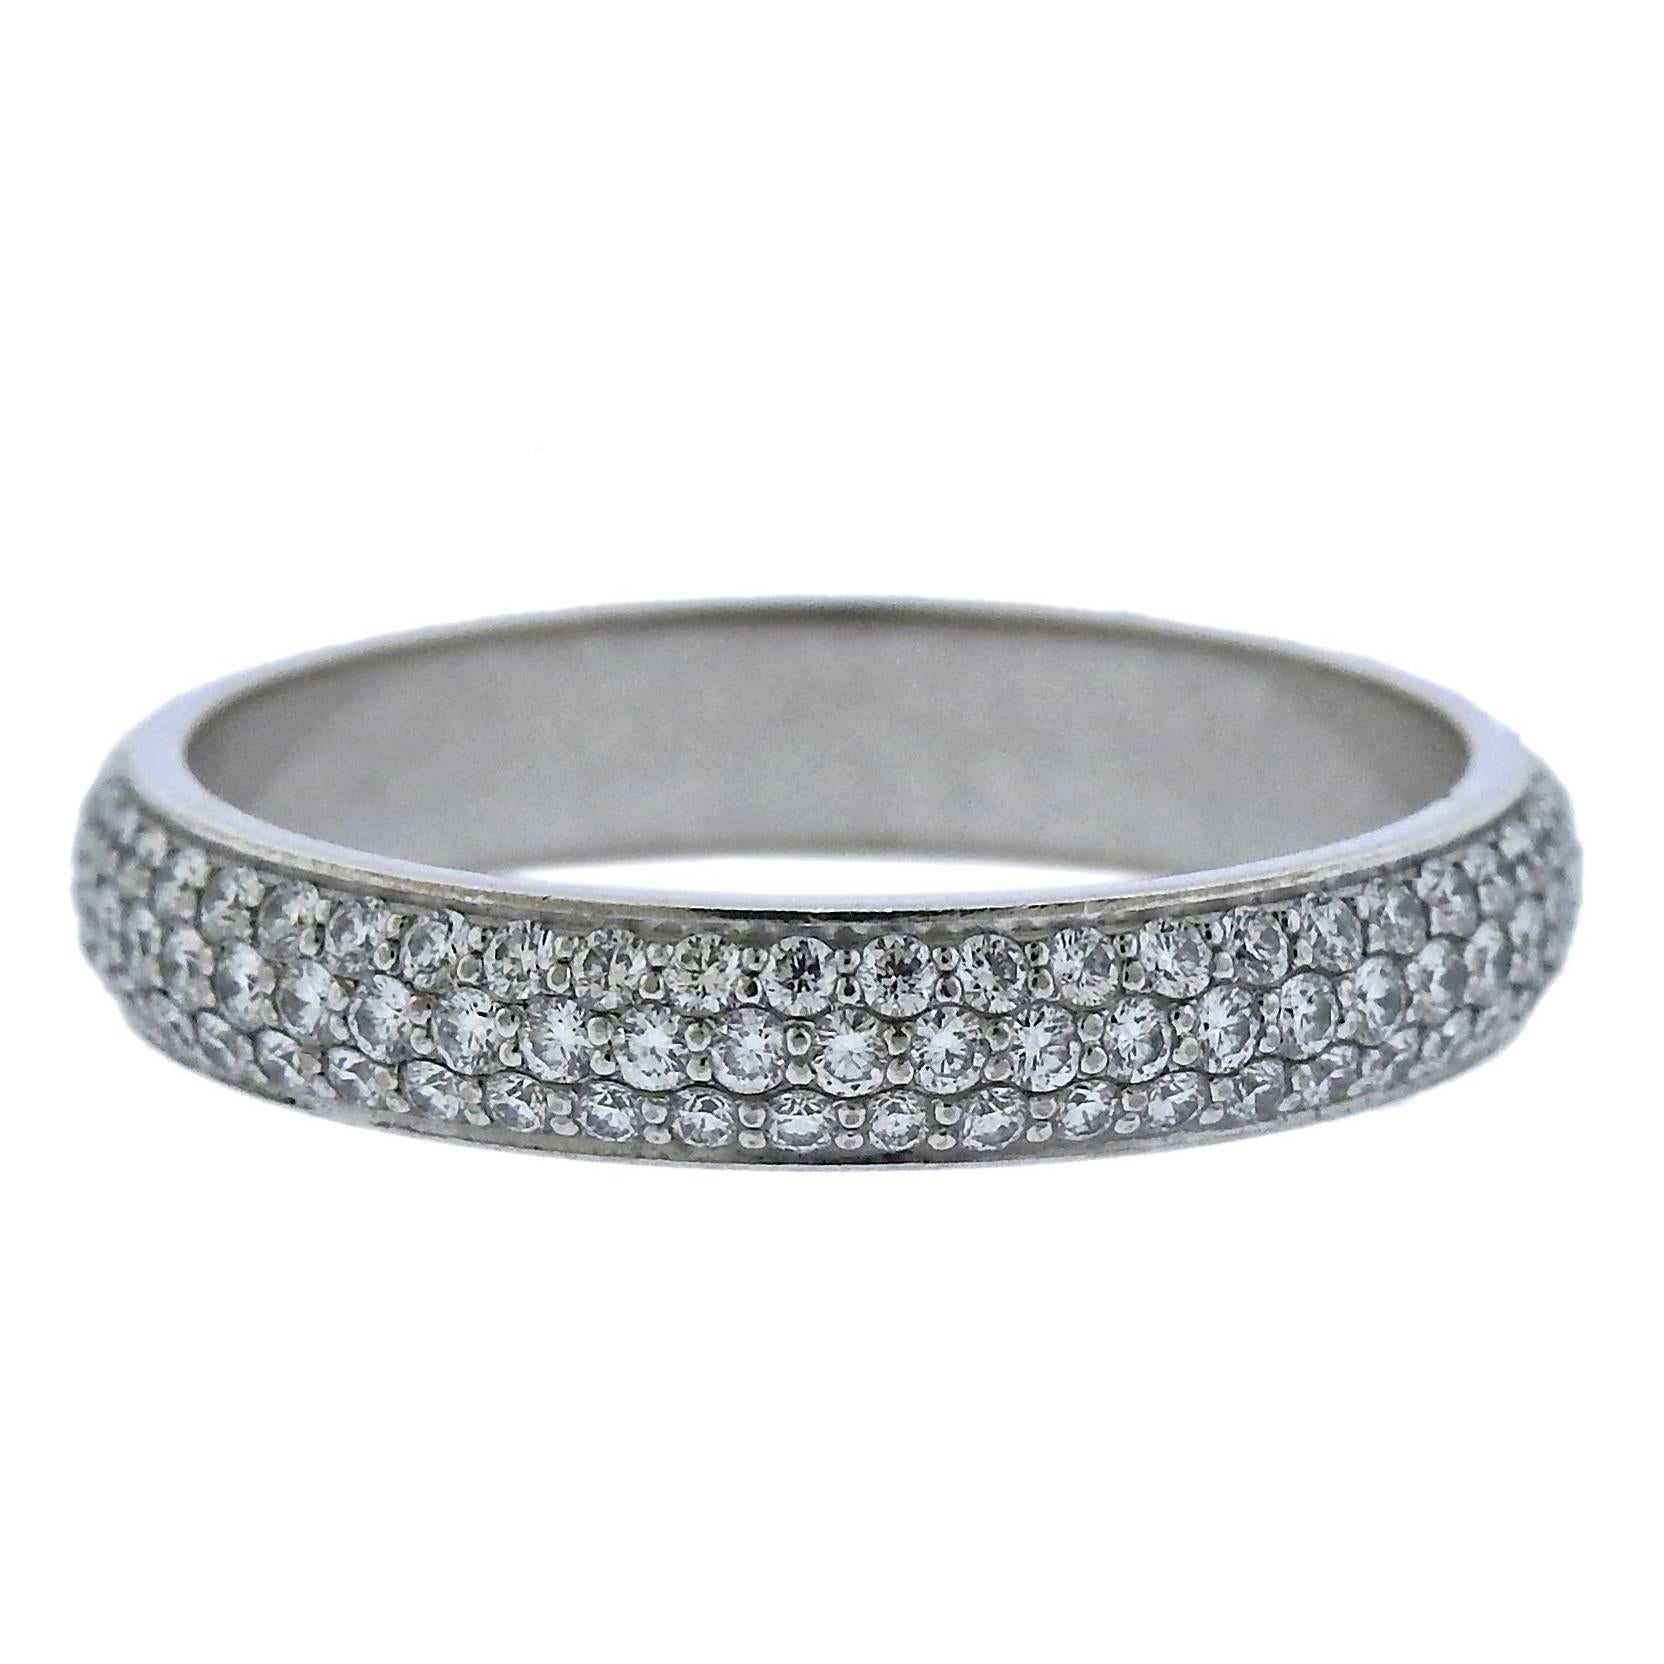 Cartier Pave Diamond Gold Eternity Wedding Band Ring